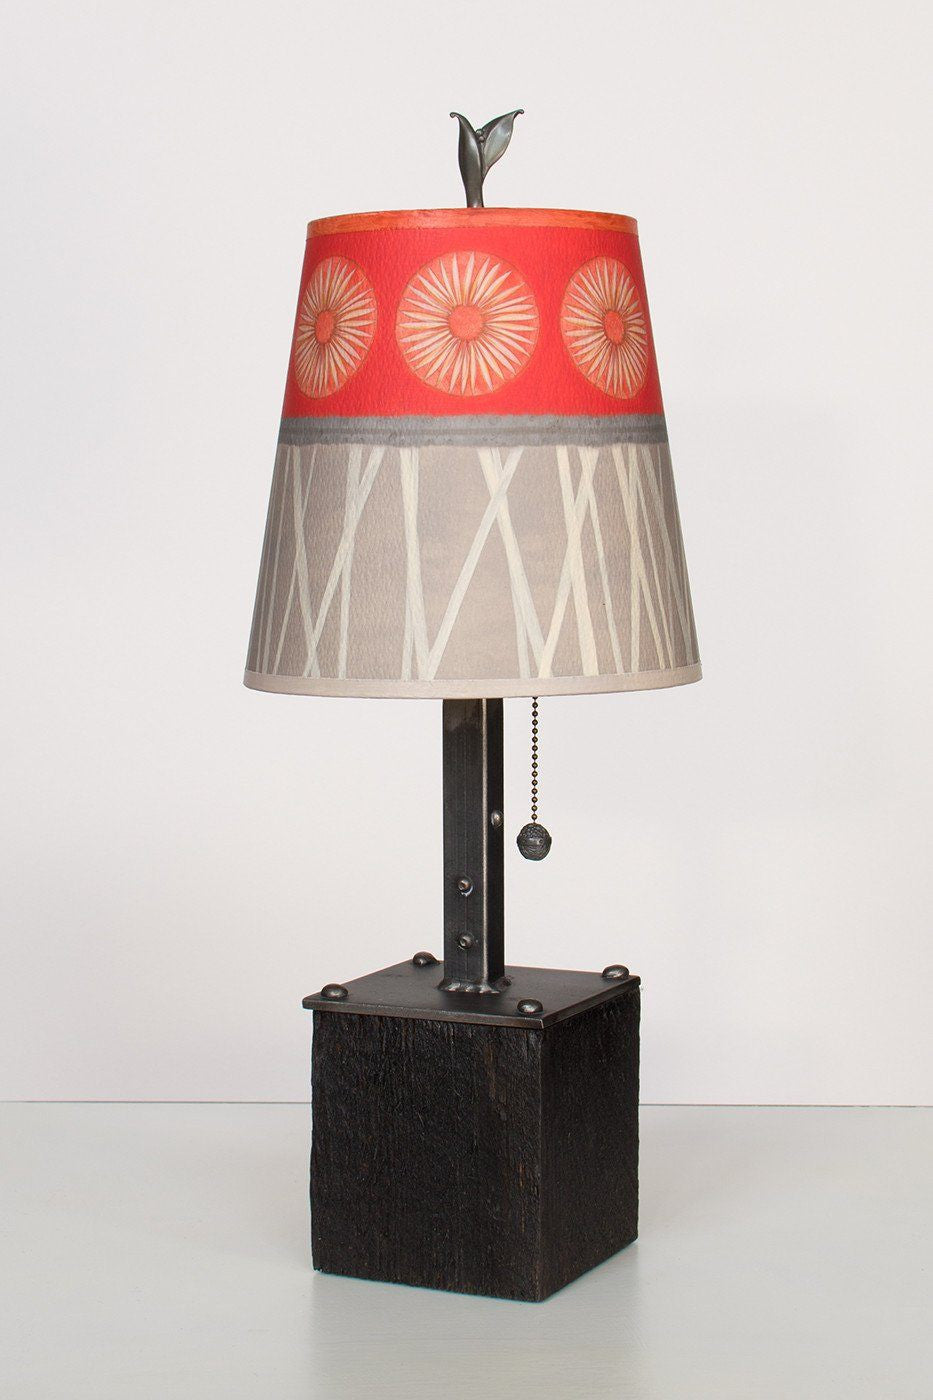 Janna Ugone & Co Table Lamps Steel Table Lamp on Reclaimed Wood with Small Drum Shade in Tang